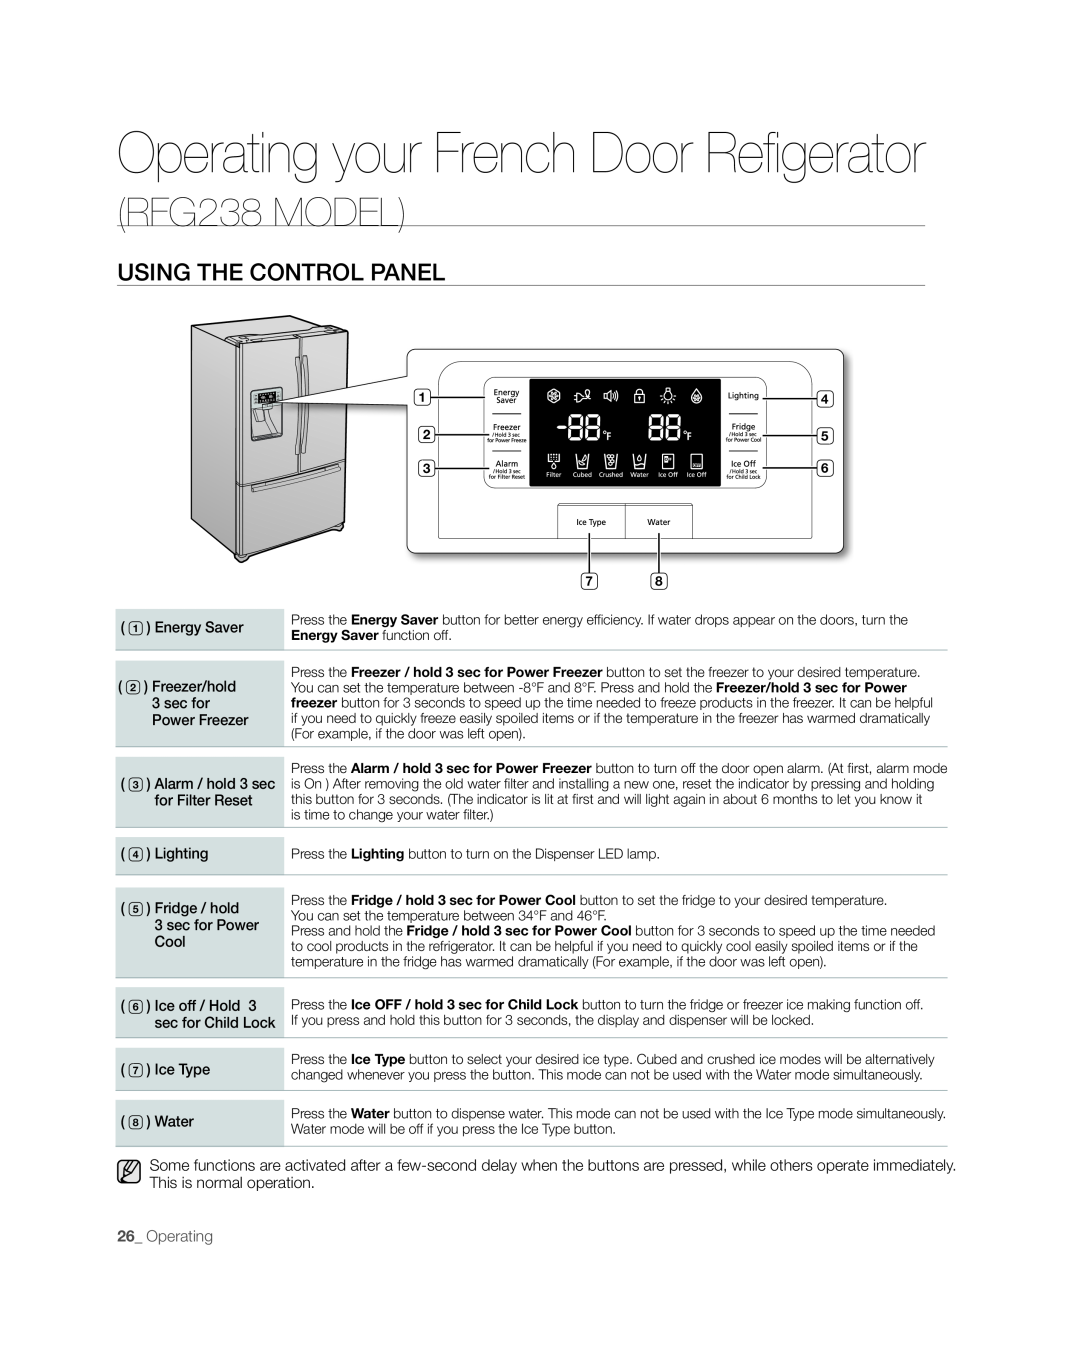 Samsung RFG237, RFG238AARS user manual RFG238 MODEL, Operating your French Door Refigerator, Using the control panel 